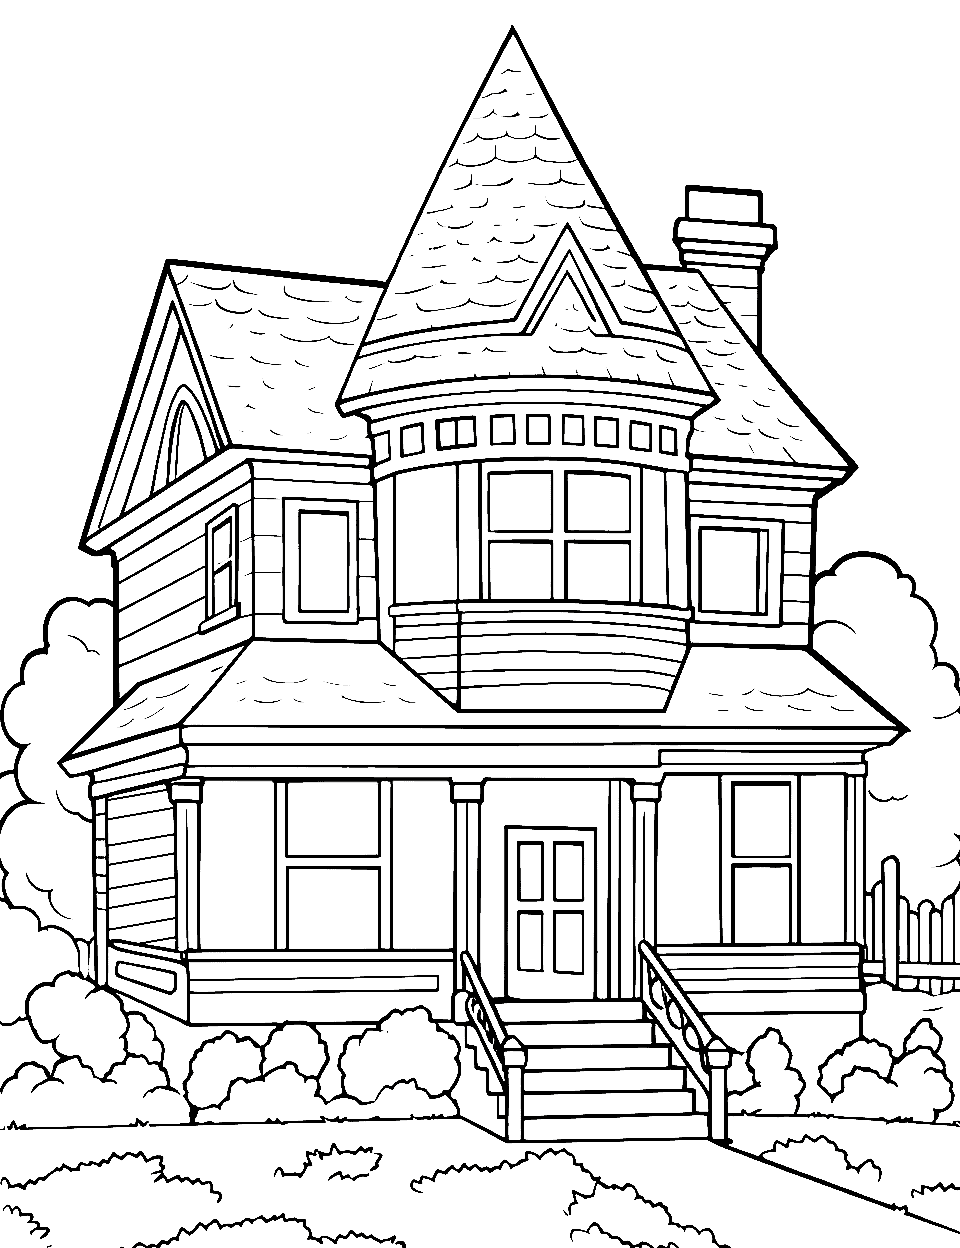 House coloring pages free printable sheets